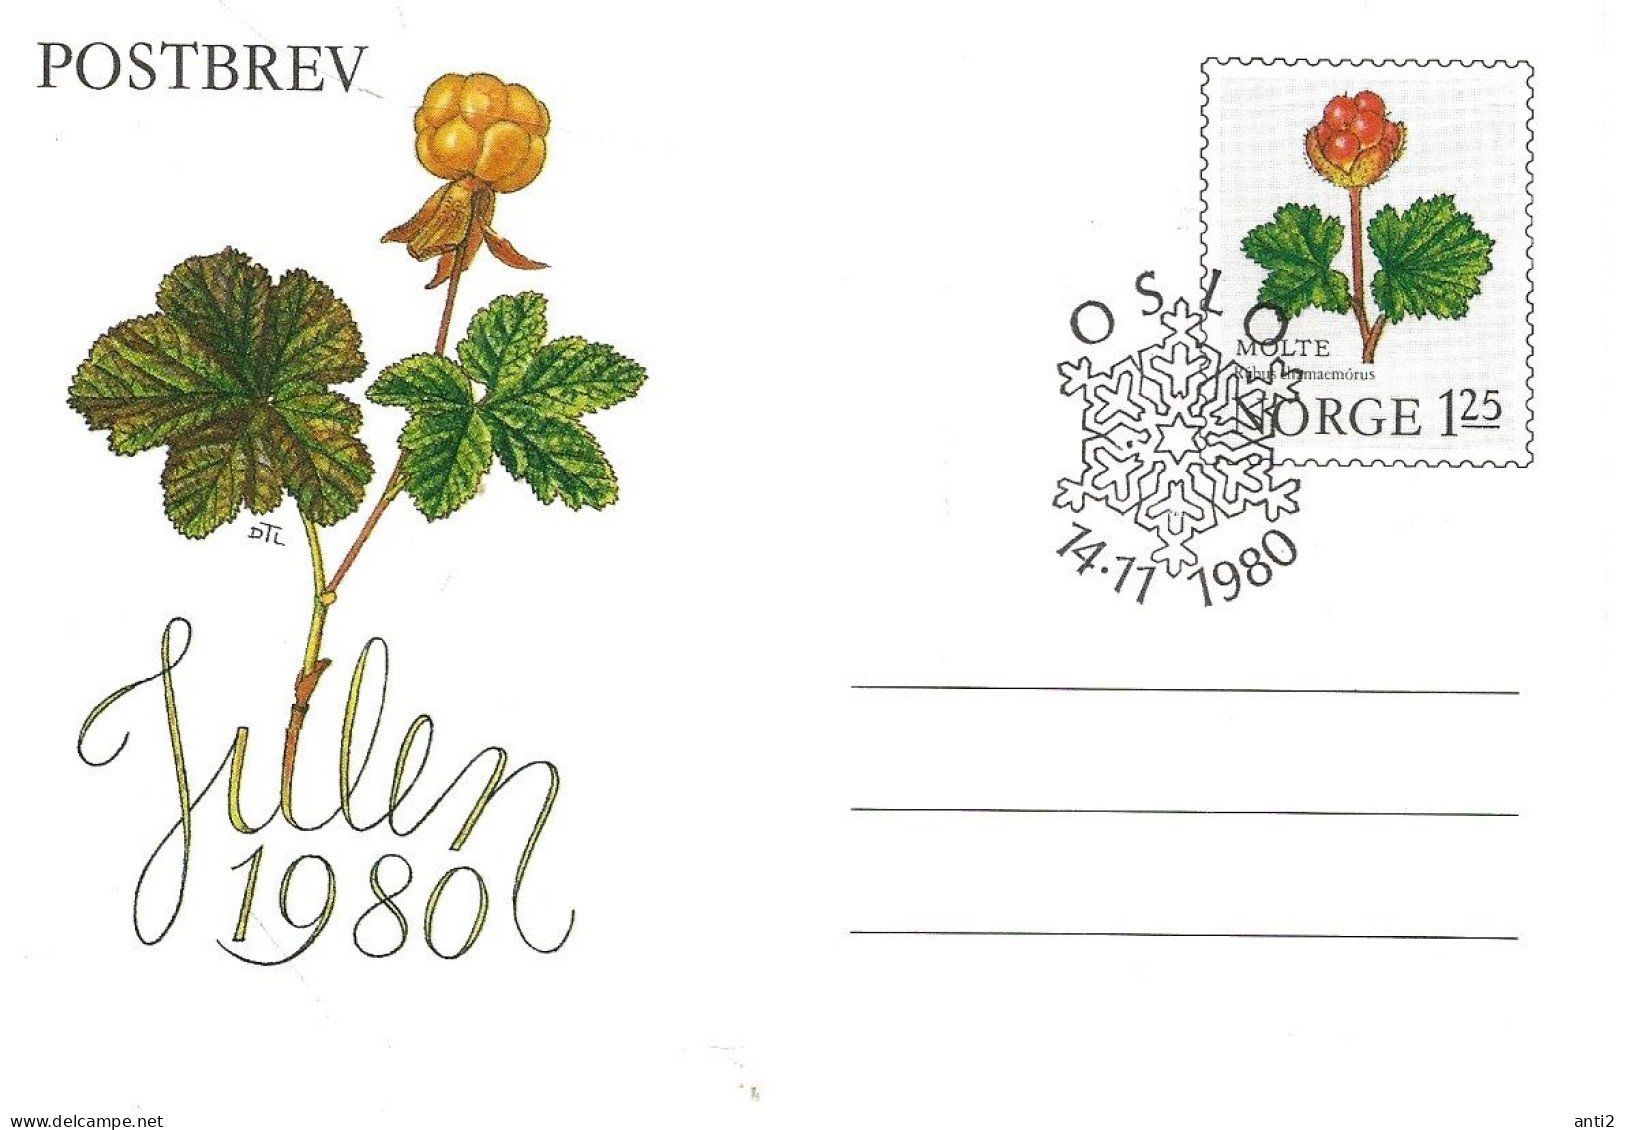 Norge Norway 1980 Stationary - Postbrev, Letter With Imprinted Stamp Special For Christmas 1980 With Ripe Berries   FDC - Brieven En Documenten